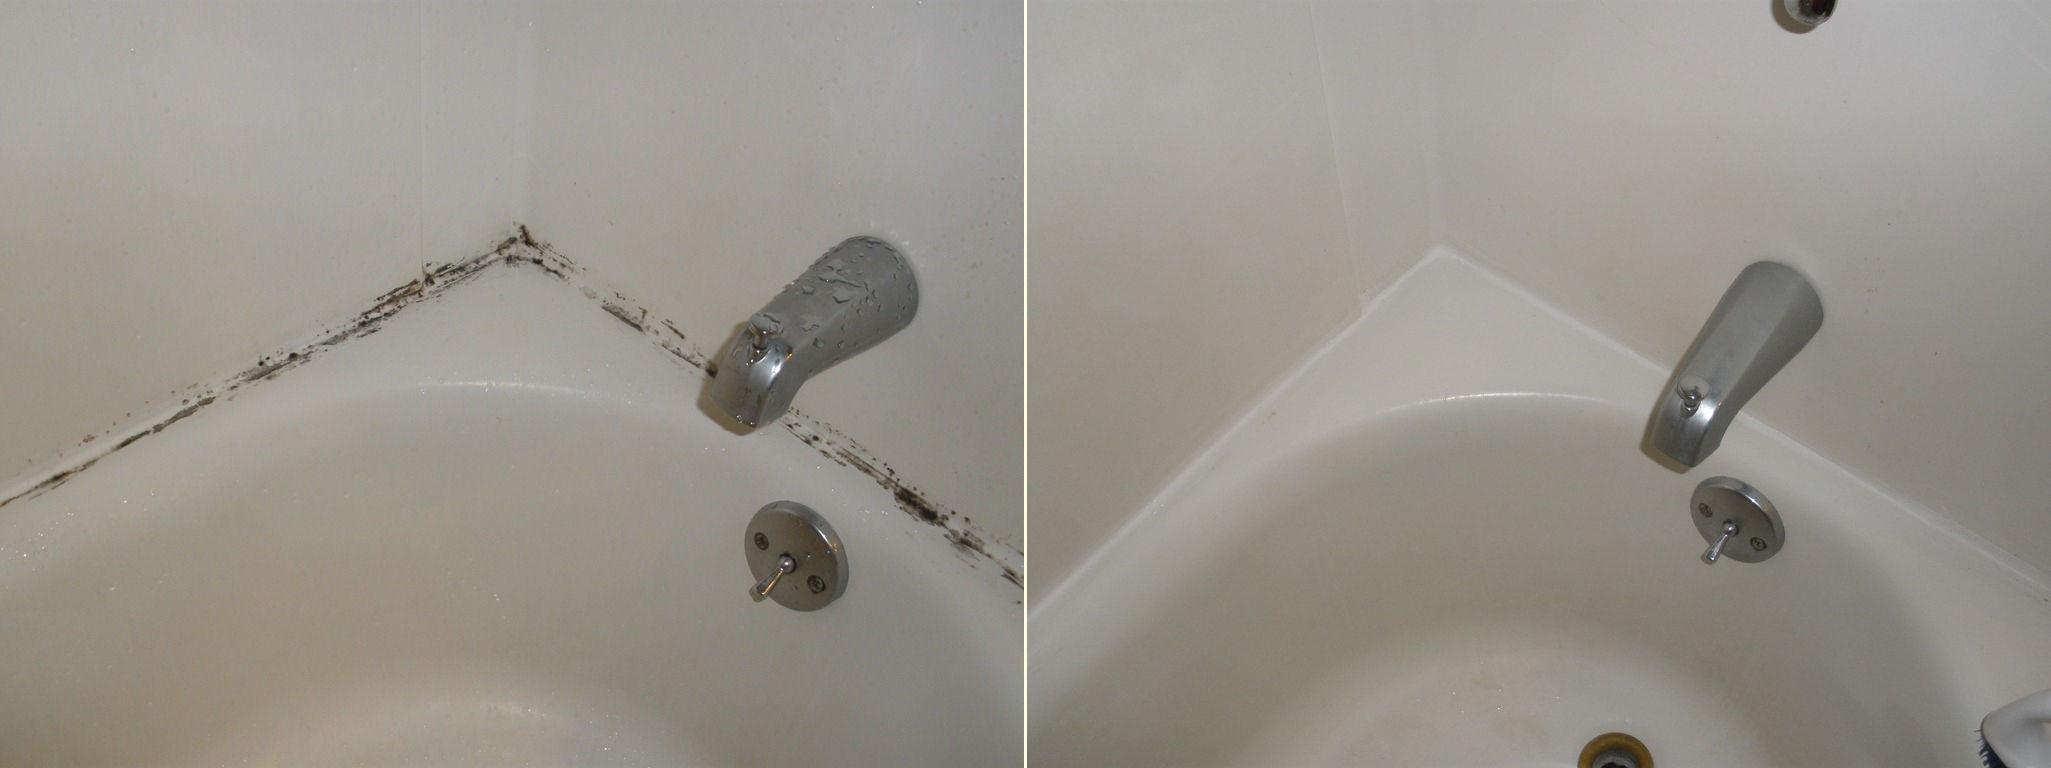 Getting Mold Out of the Shower